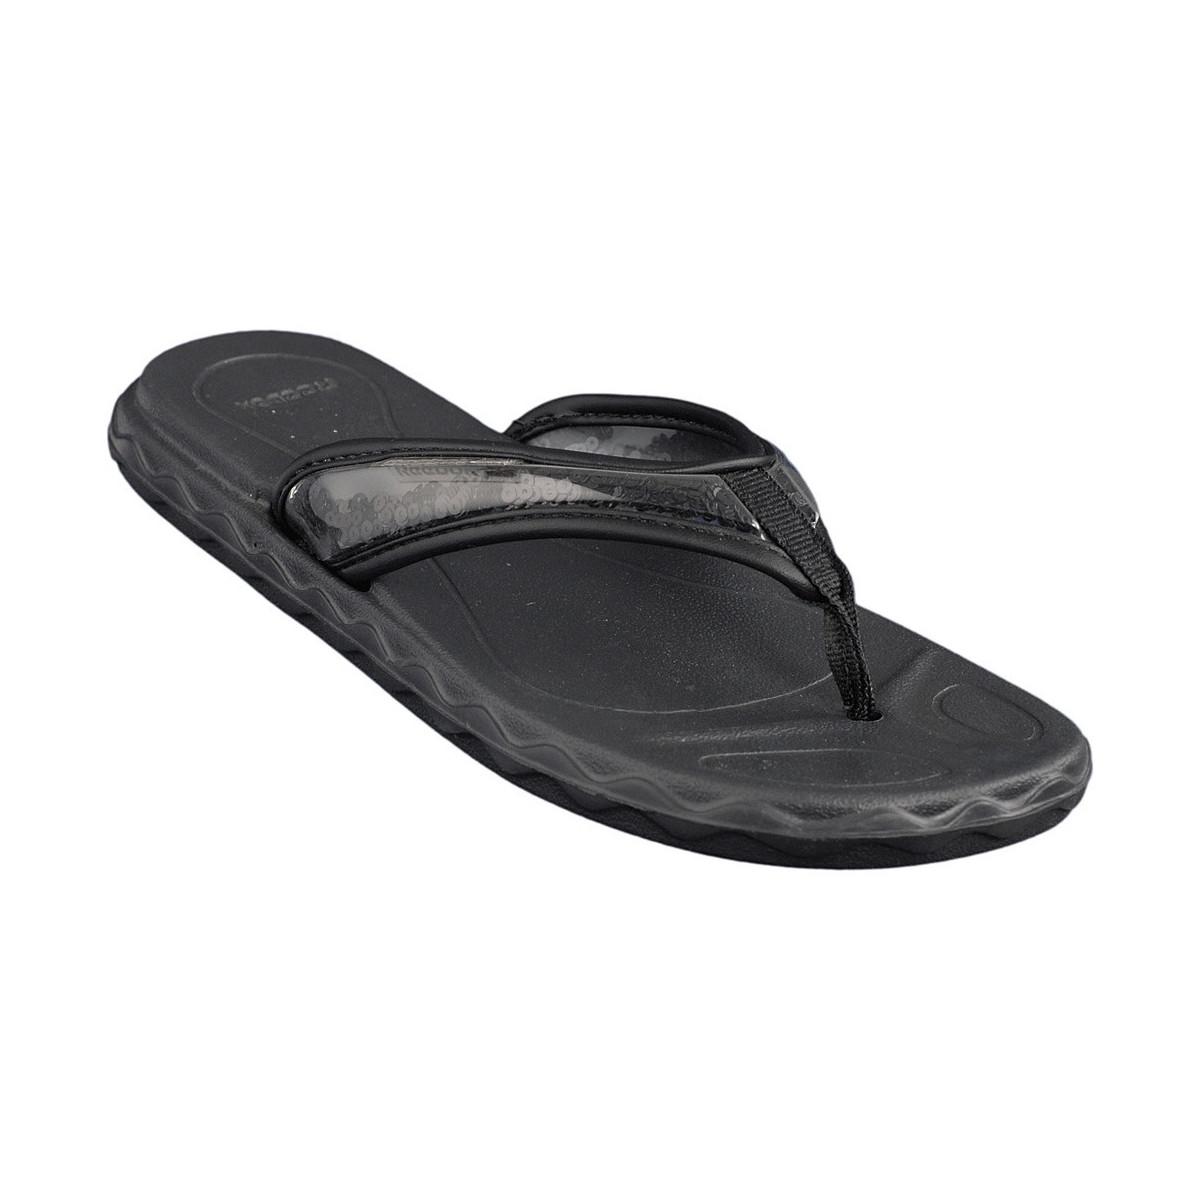 reebok womens flip flops Cheaper Than Retail Price> Buy Clothing,  Accessories and lifestyle products for women & men -